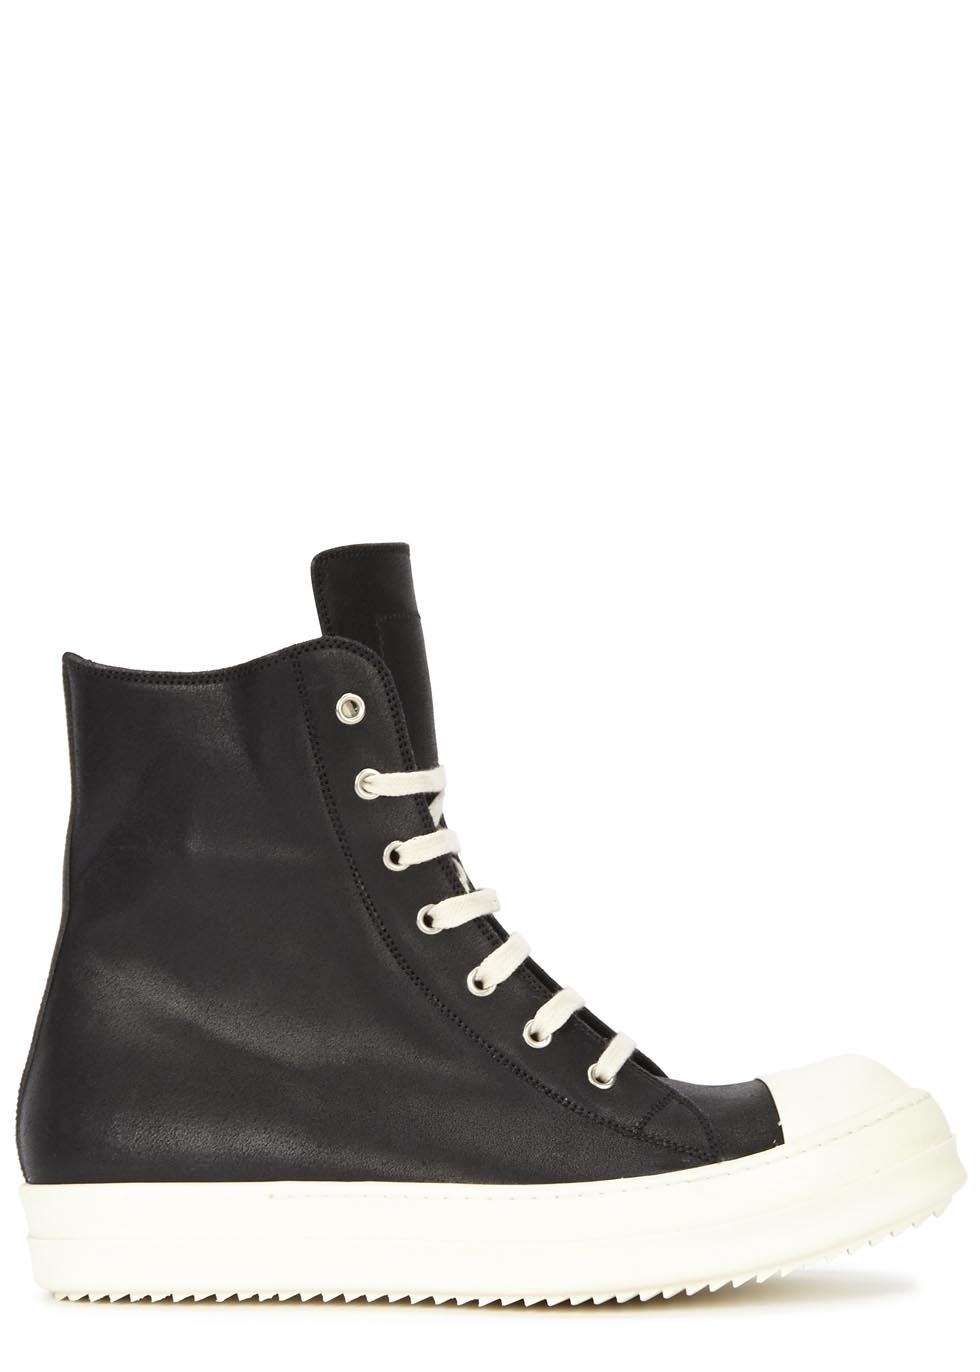 Black treated leather hi-top trainers